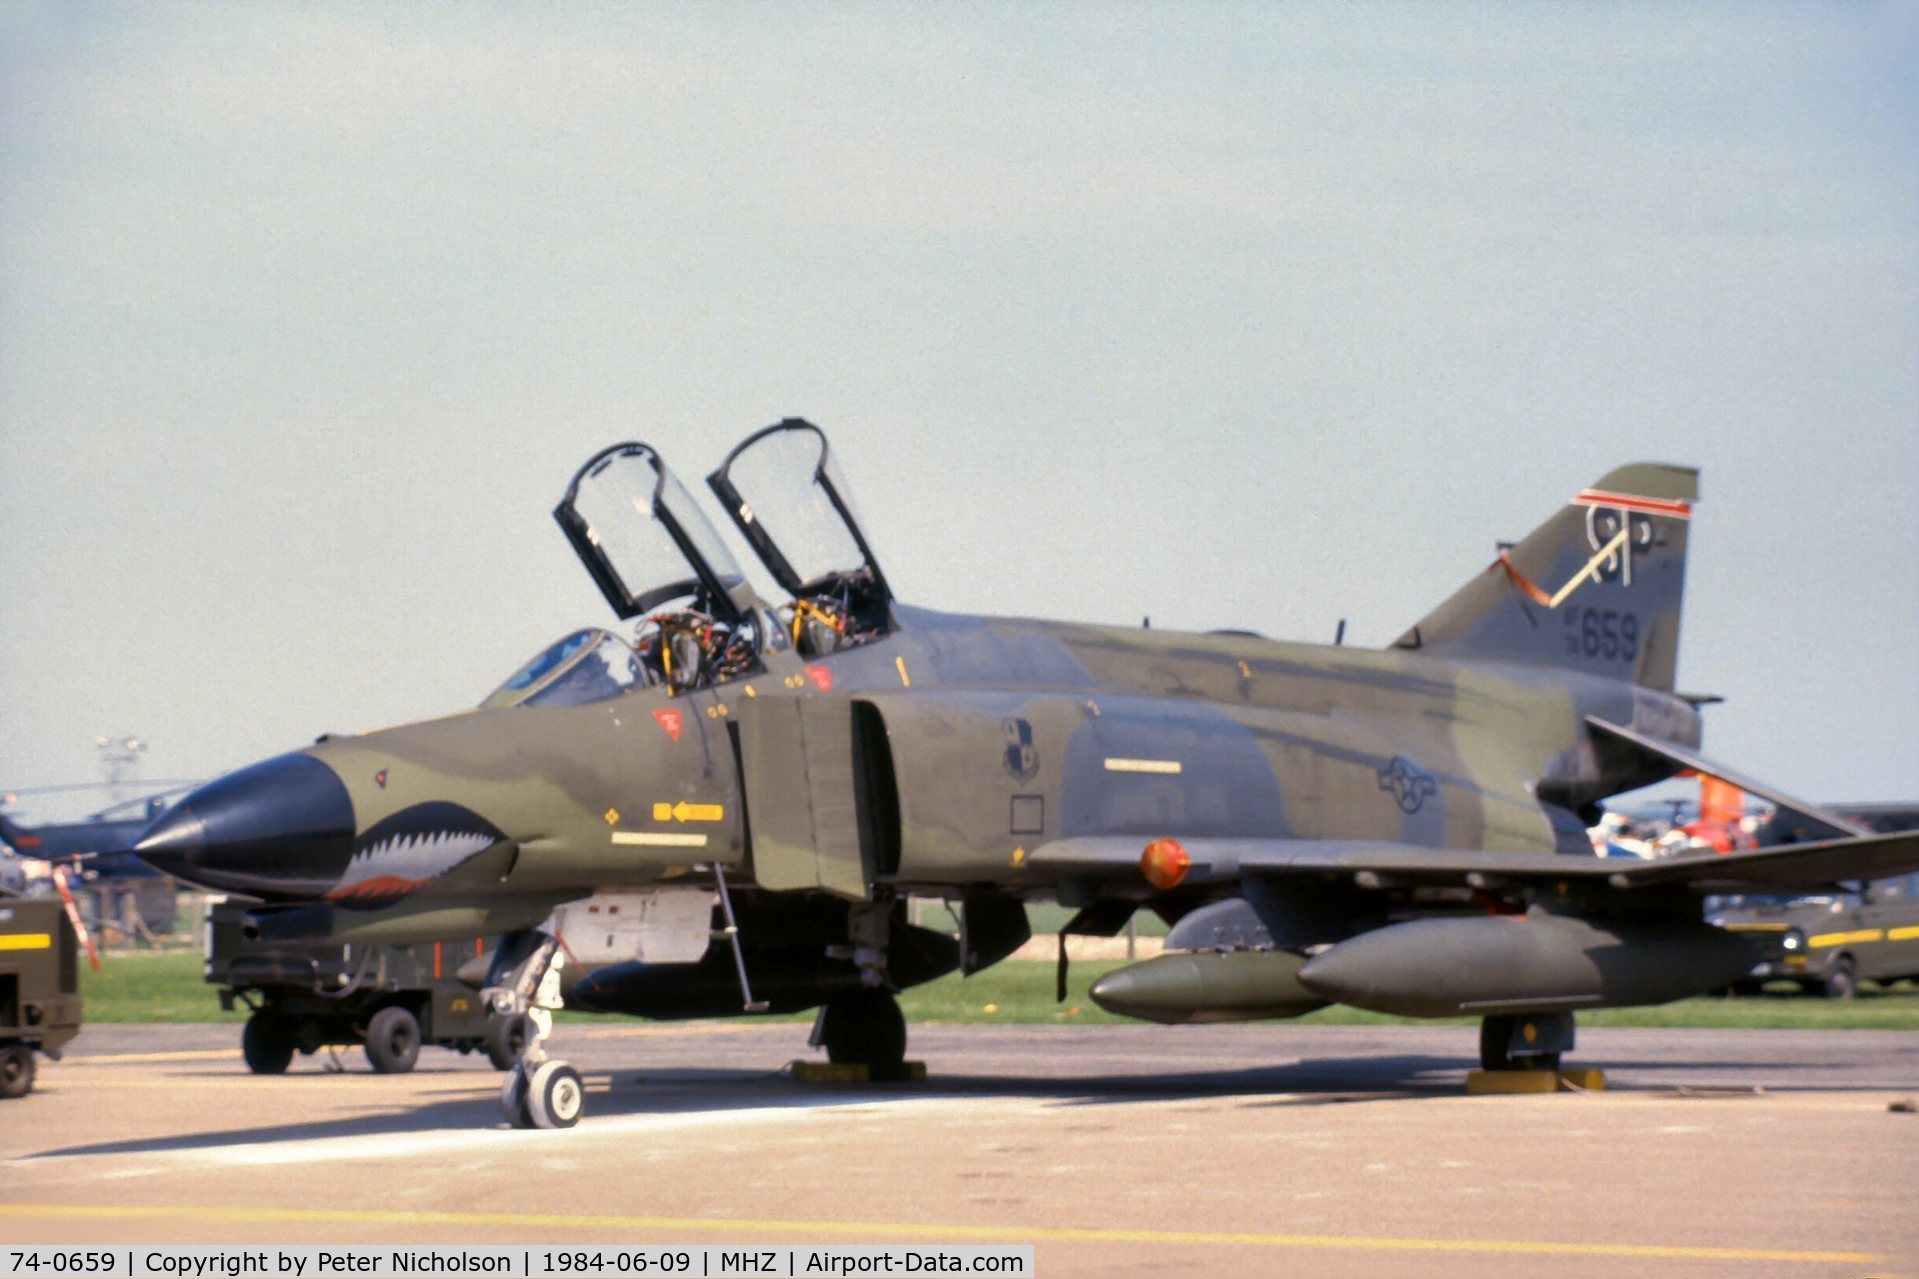 74-0659, 1974 McDonnell Douglas F-4E Phantom II C/N 4810, F-4E Phantom of 480 Tactical Fighter Squadron/52 Tactical Fighter Wing at the 1984 RAF Mildenhall Air Fete.